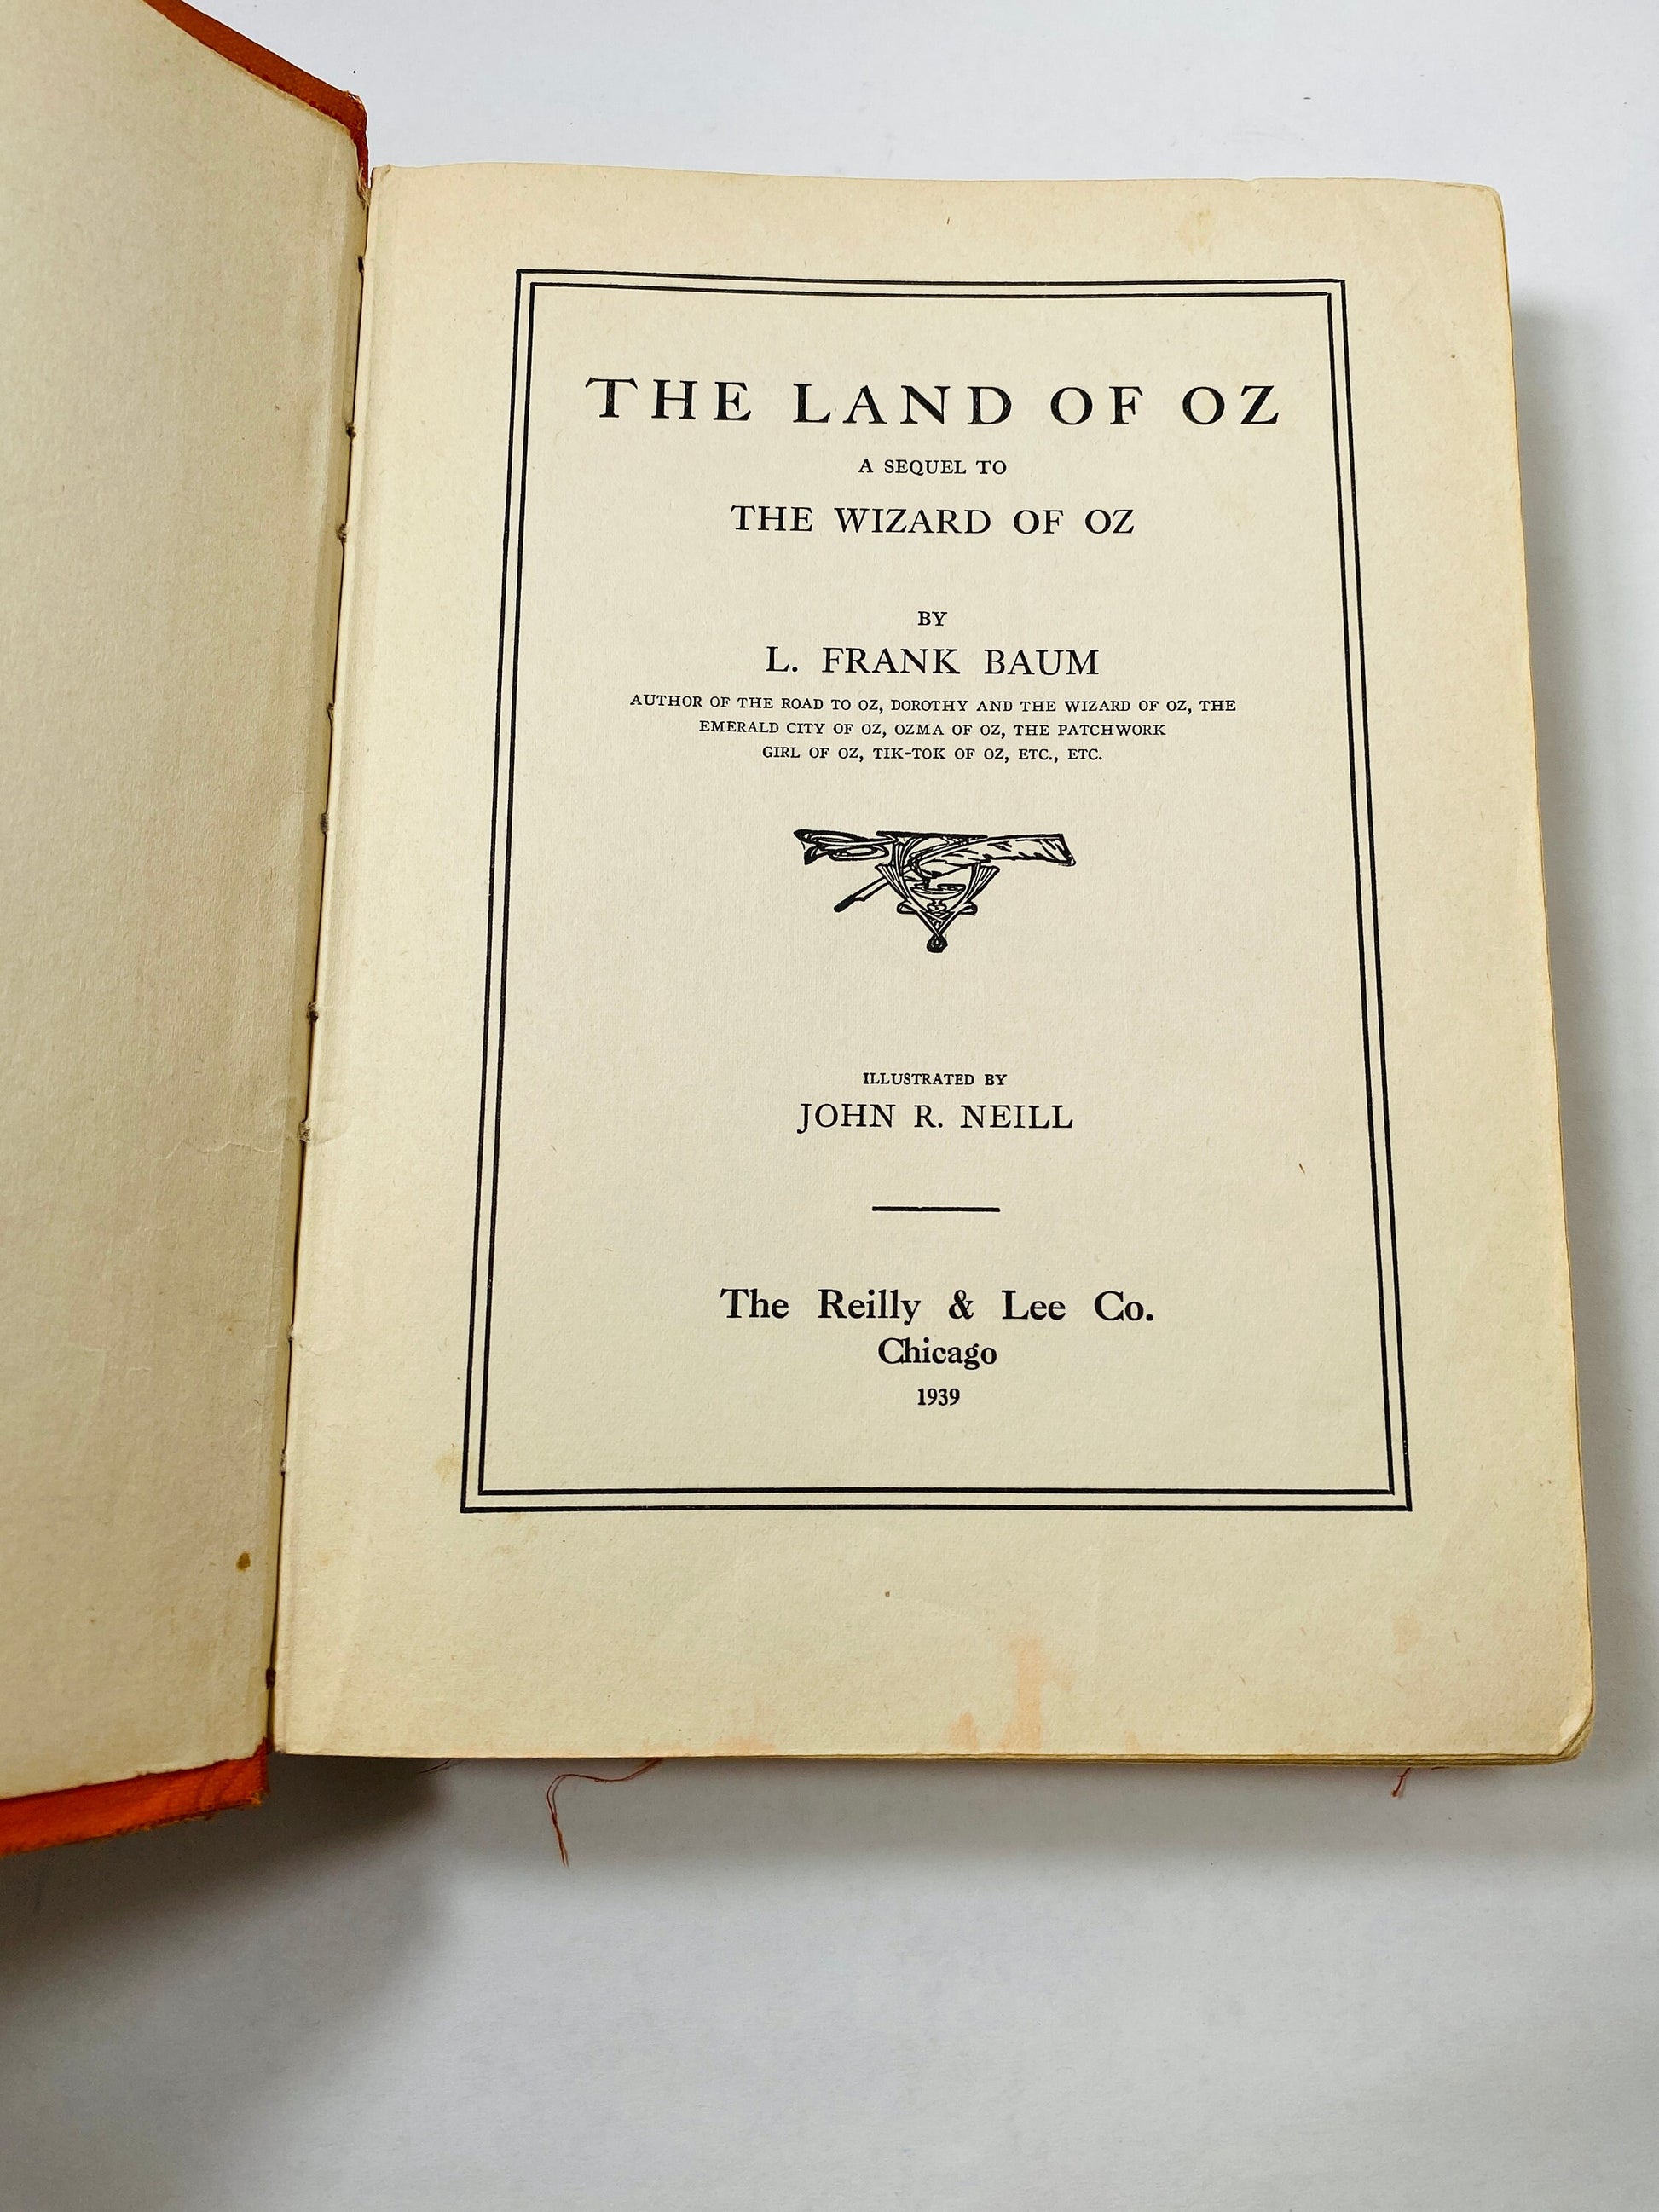 Land of Oz by Frank Baum vintage book circa 1939 Magical tale of adventure and love in the Land of Oz. Reilly & Lee Co. John R Neill